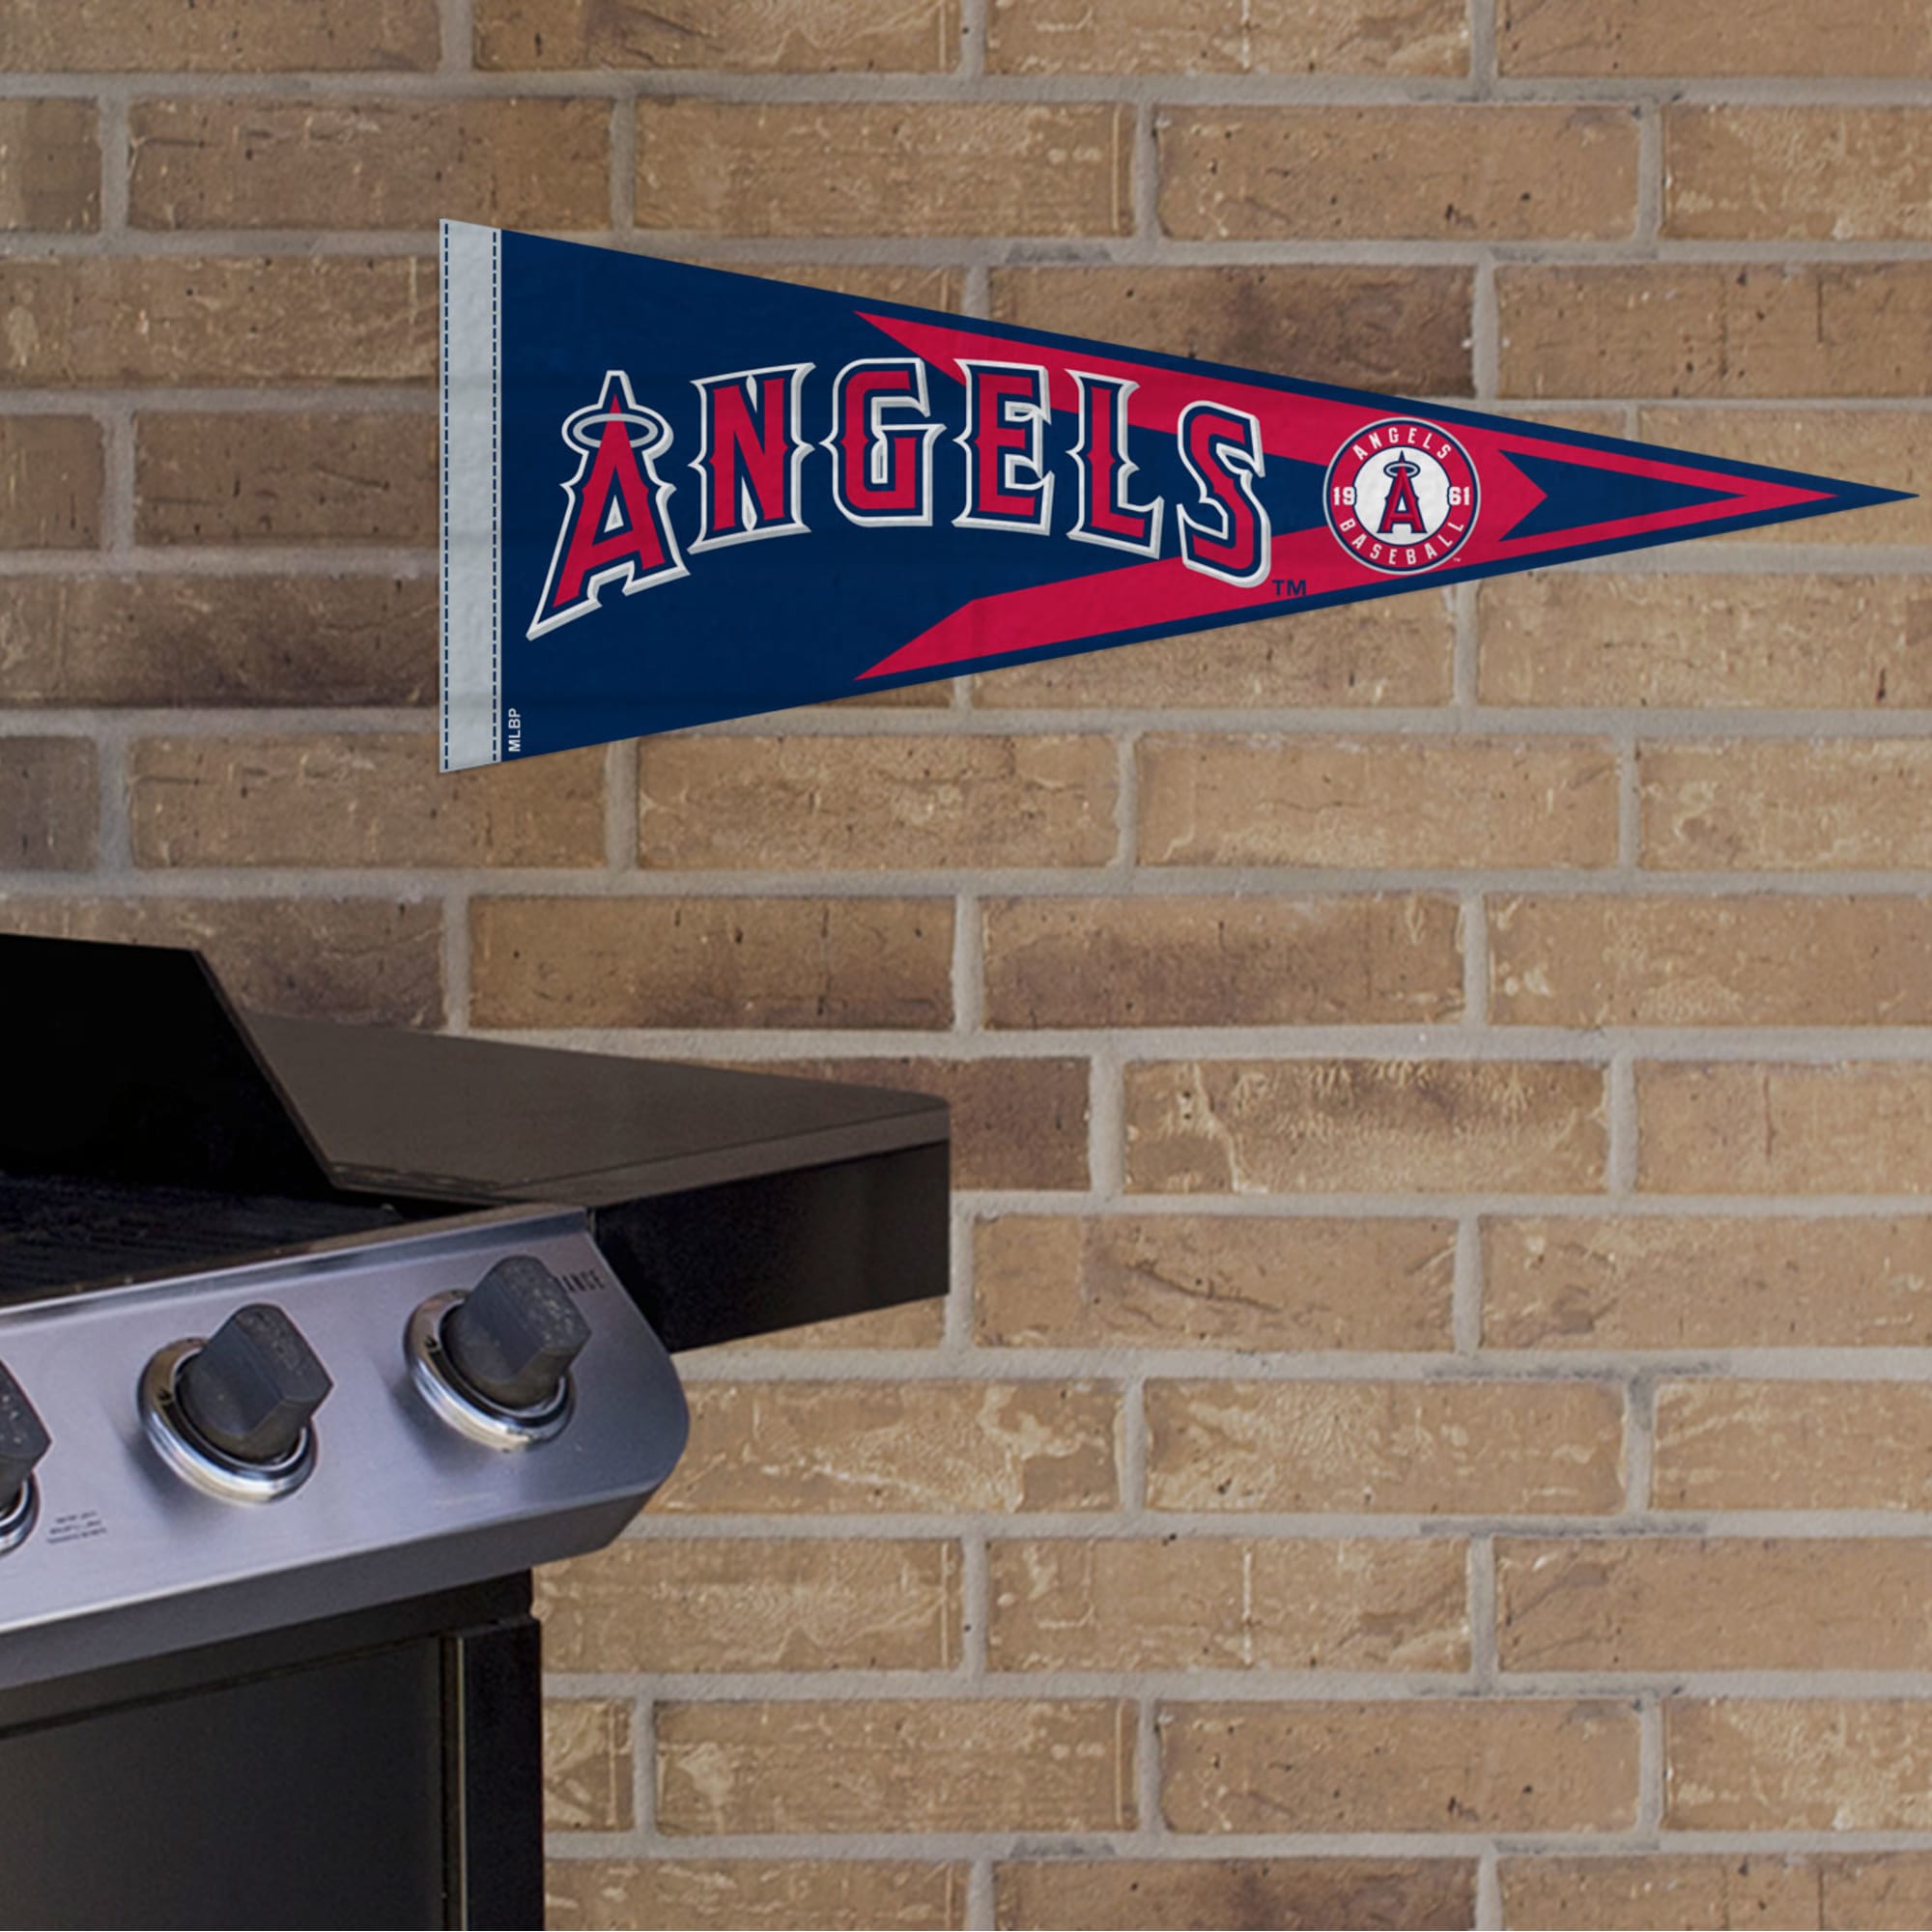 LA Angels: Pennant - Officially Licensed MLB Outdoor Graphic 24.0"W x 9.0"H by Fathead | Wood/Aluminum